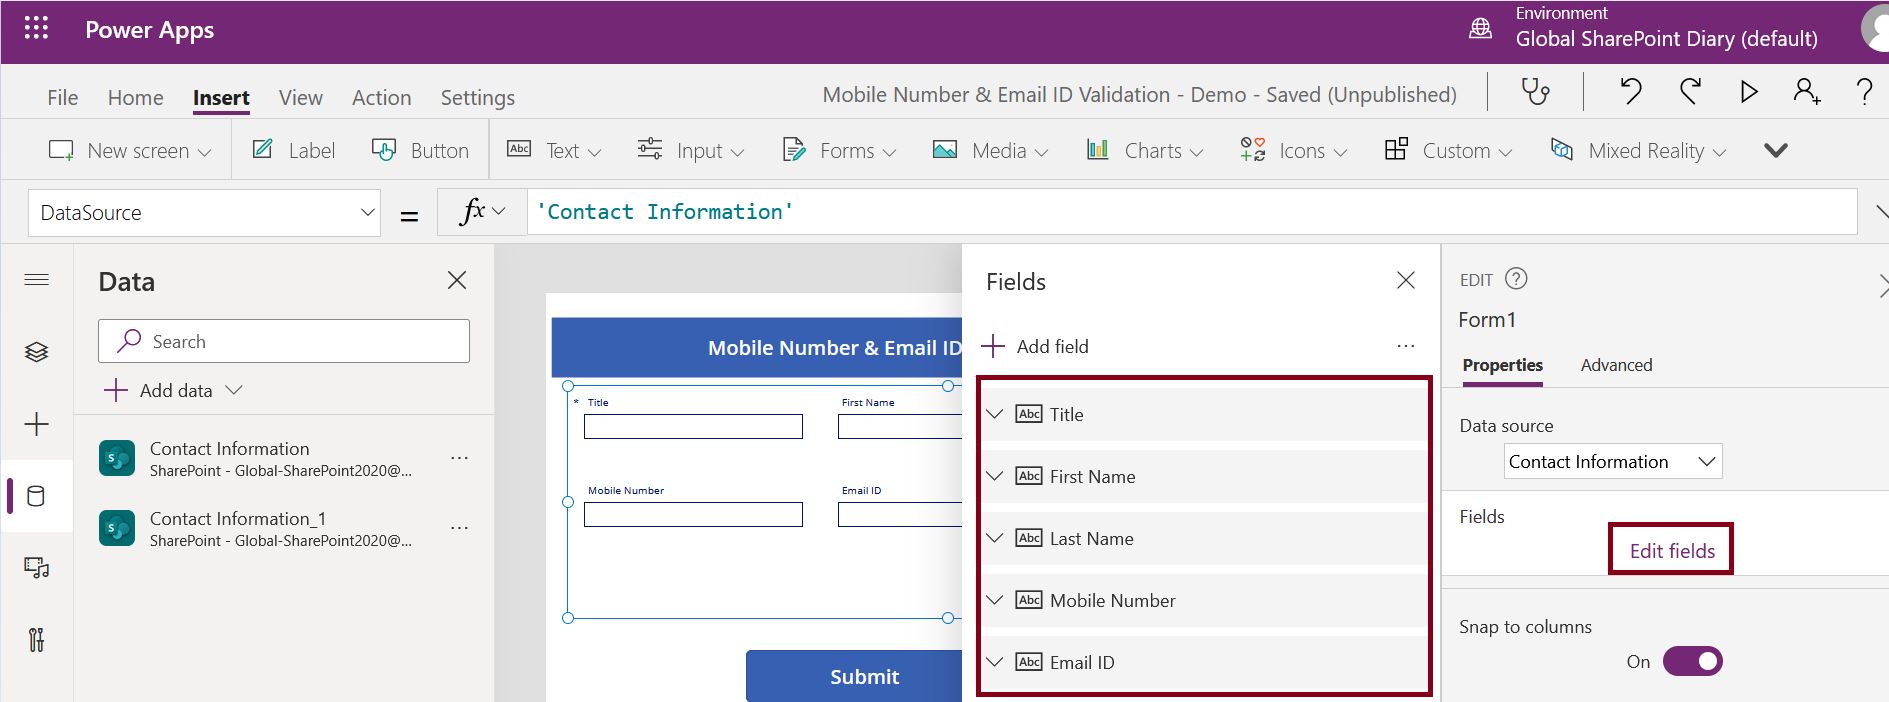 Add or remove fields in SharePoint data source from PowerApps